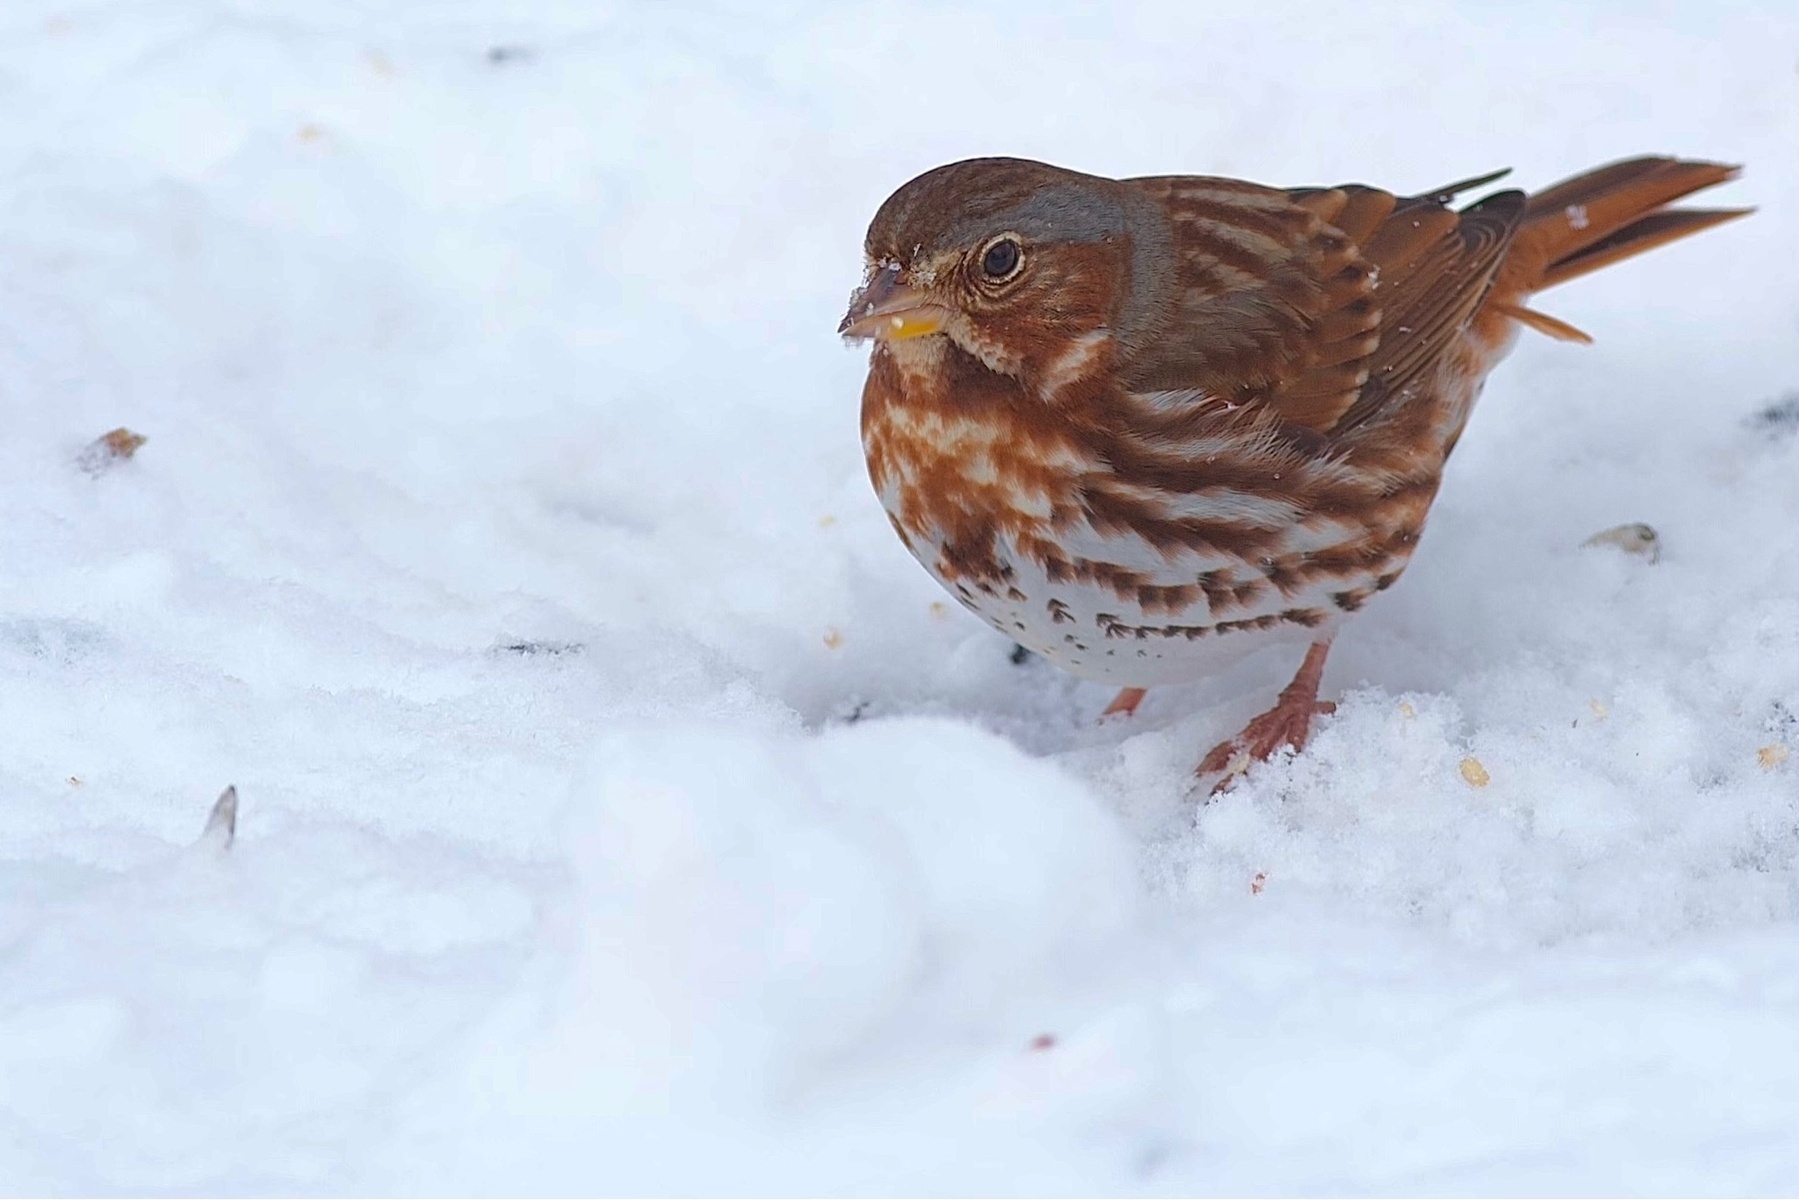 A primarily brownish orange bird with white speckled chest and small bands of gray along the side and back of its head is foraging for seeds in the snow.